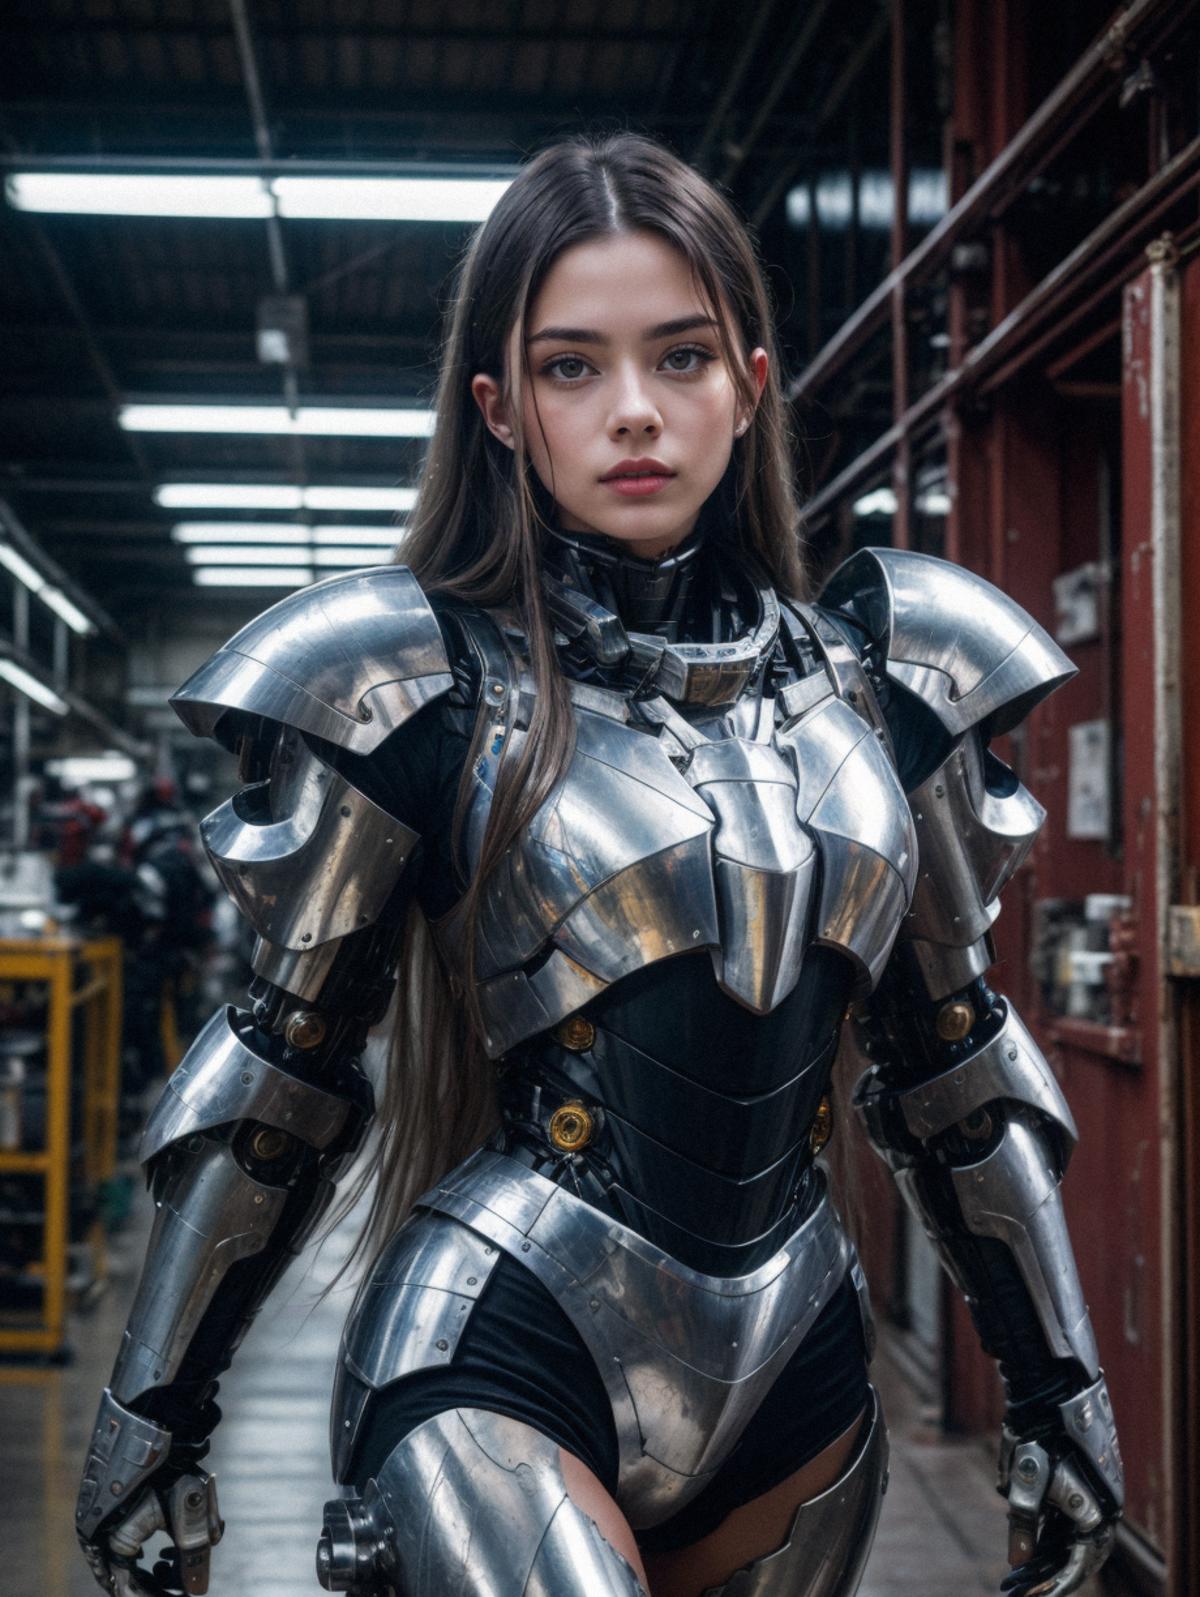 Woman wearing a silver armor or robotic suit standing in a building.